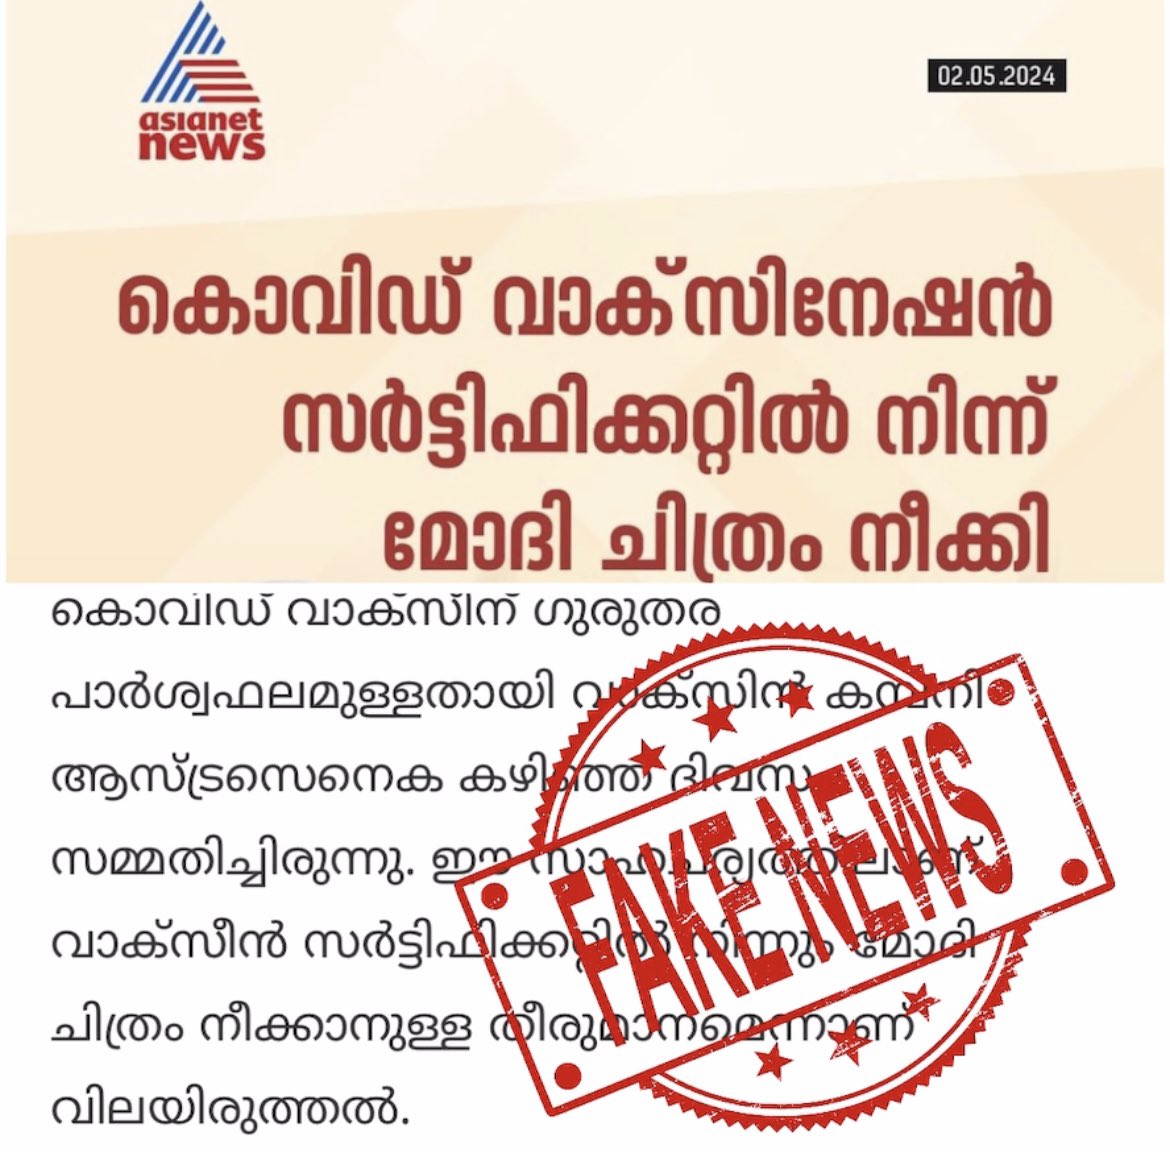 This is another #Fakenews attempt by @AsianetNewsML caught red handed by social media. The media which is notorious for peddling fake news and being called as “mapras” started getting the real treatment from social media nowadays. @rajeshkalra #asianetnews #fakenews